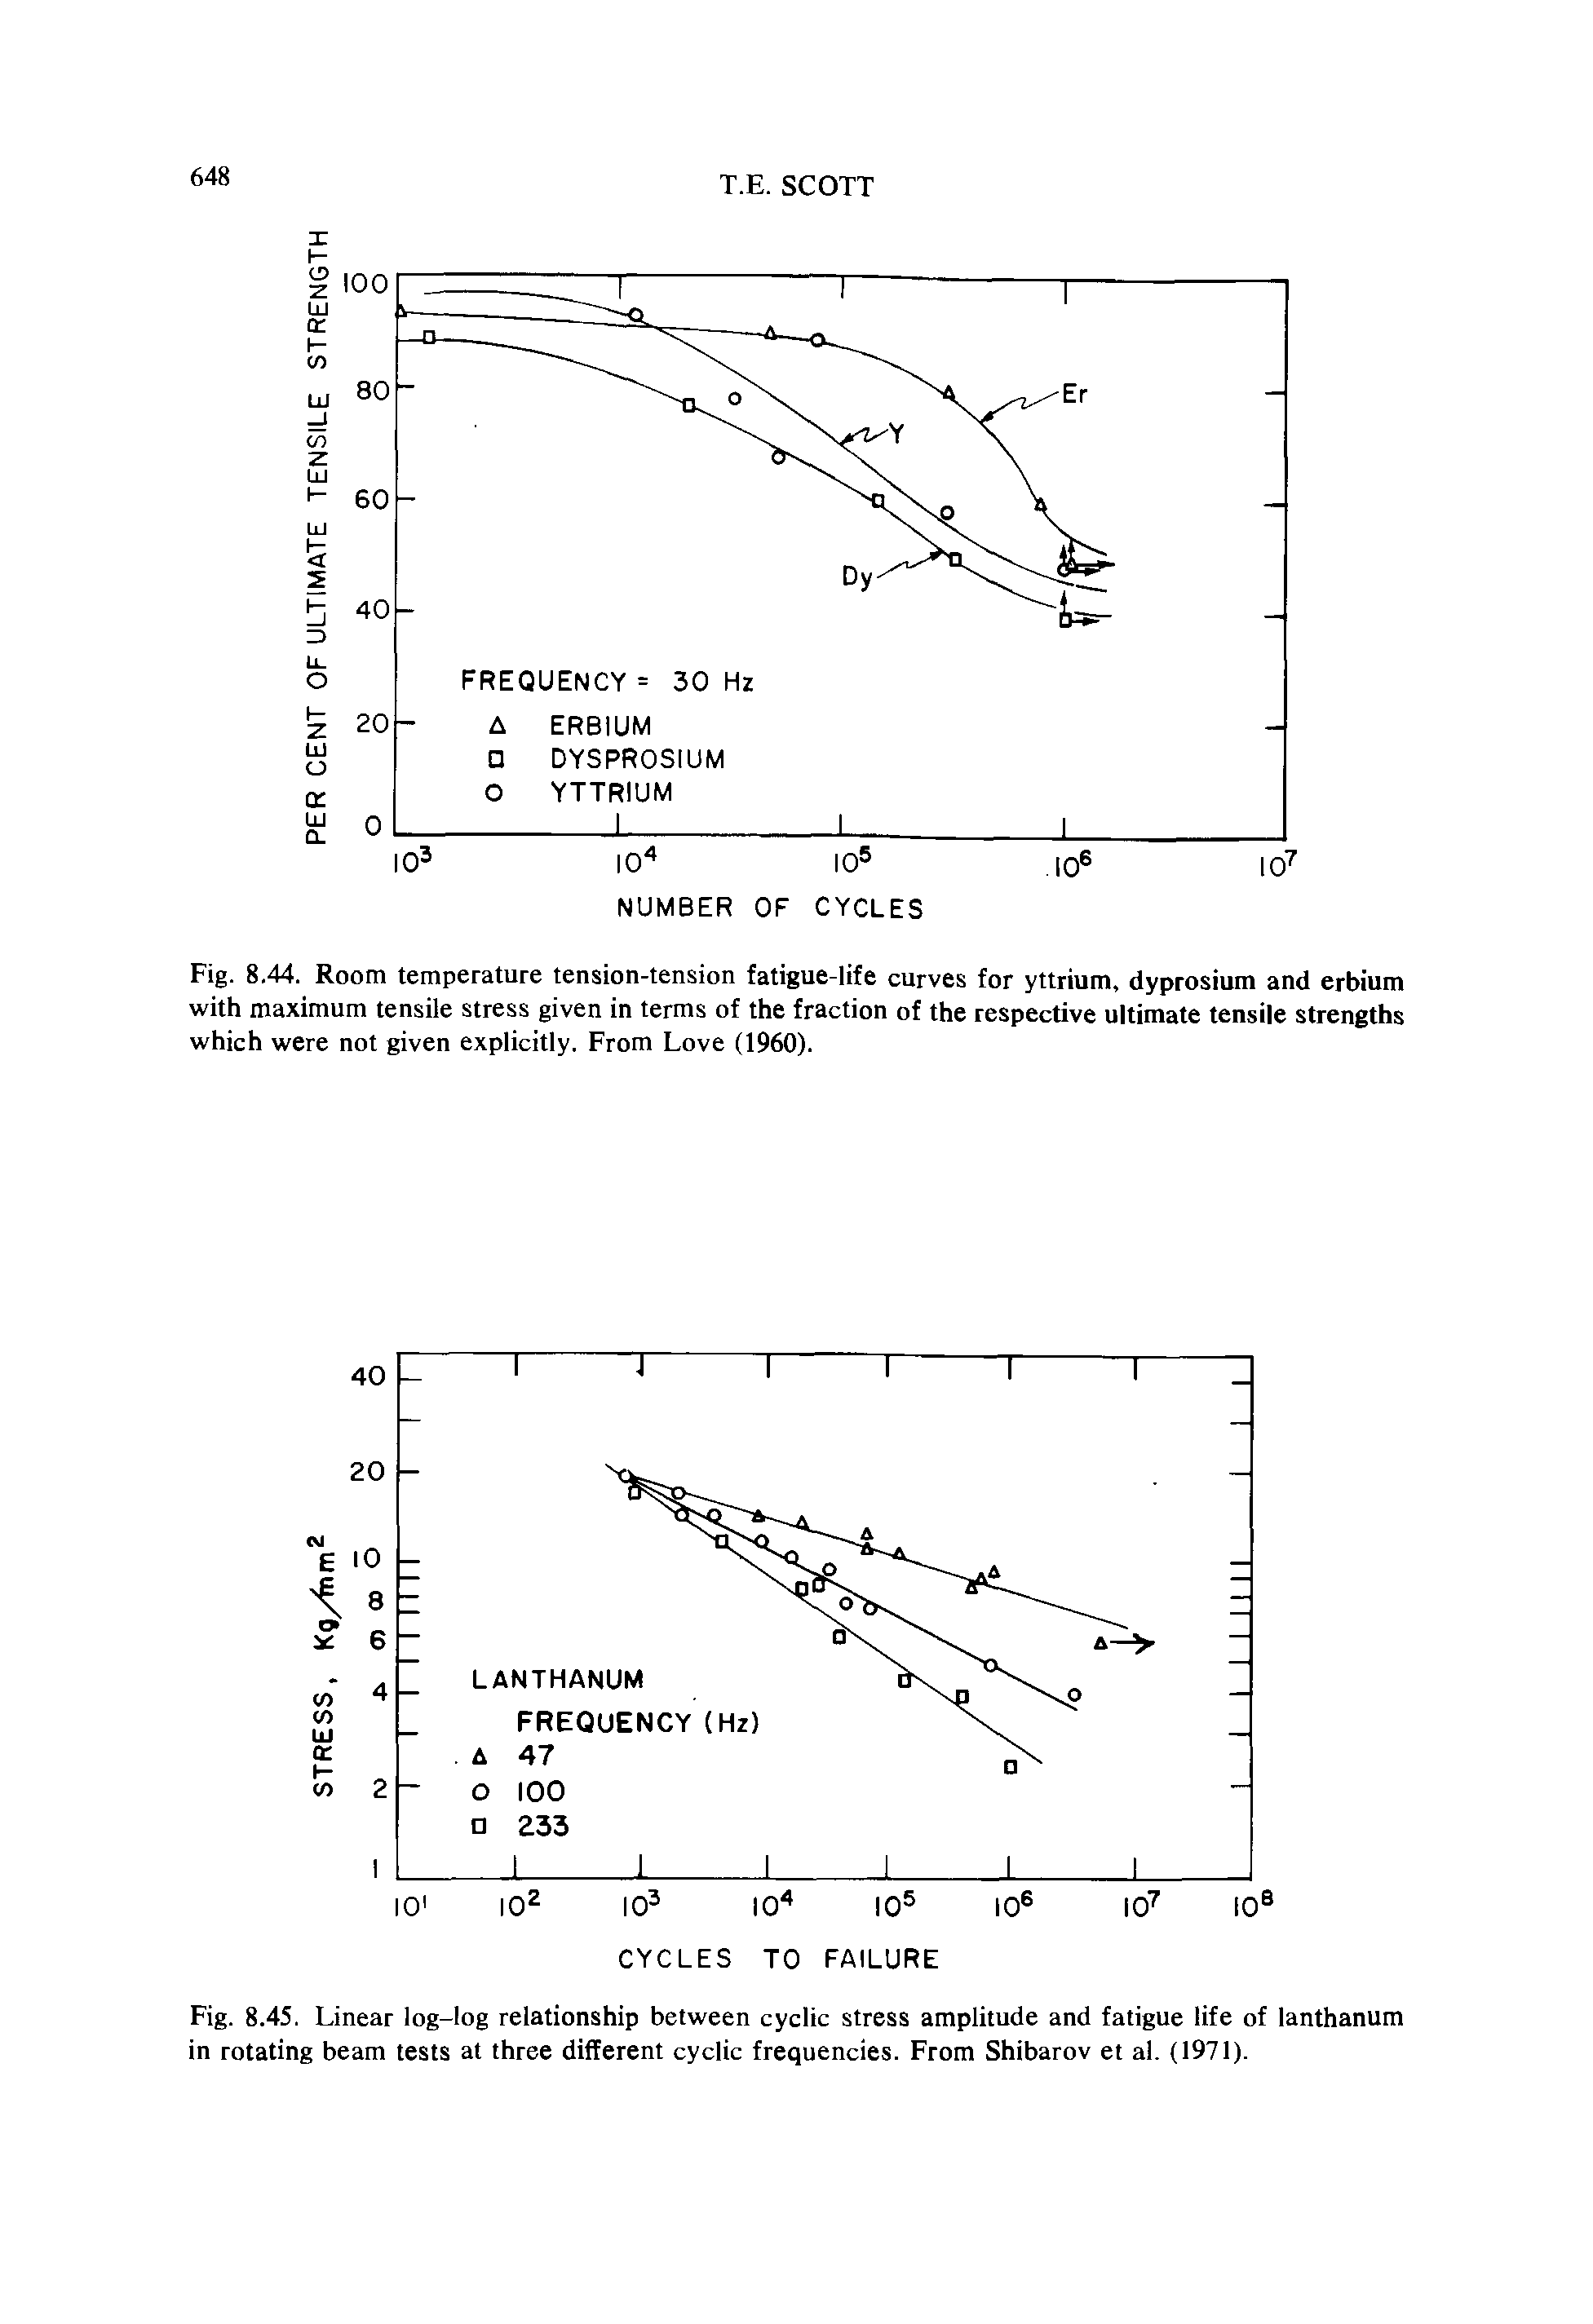 Fig. 8.45. Linear log-log relationship between cyclic stress amplitude and fatigue life of lanthanum in rotating beam tests at three different cyclic frequencies. From Shibarov et al. (1971).